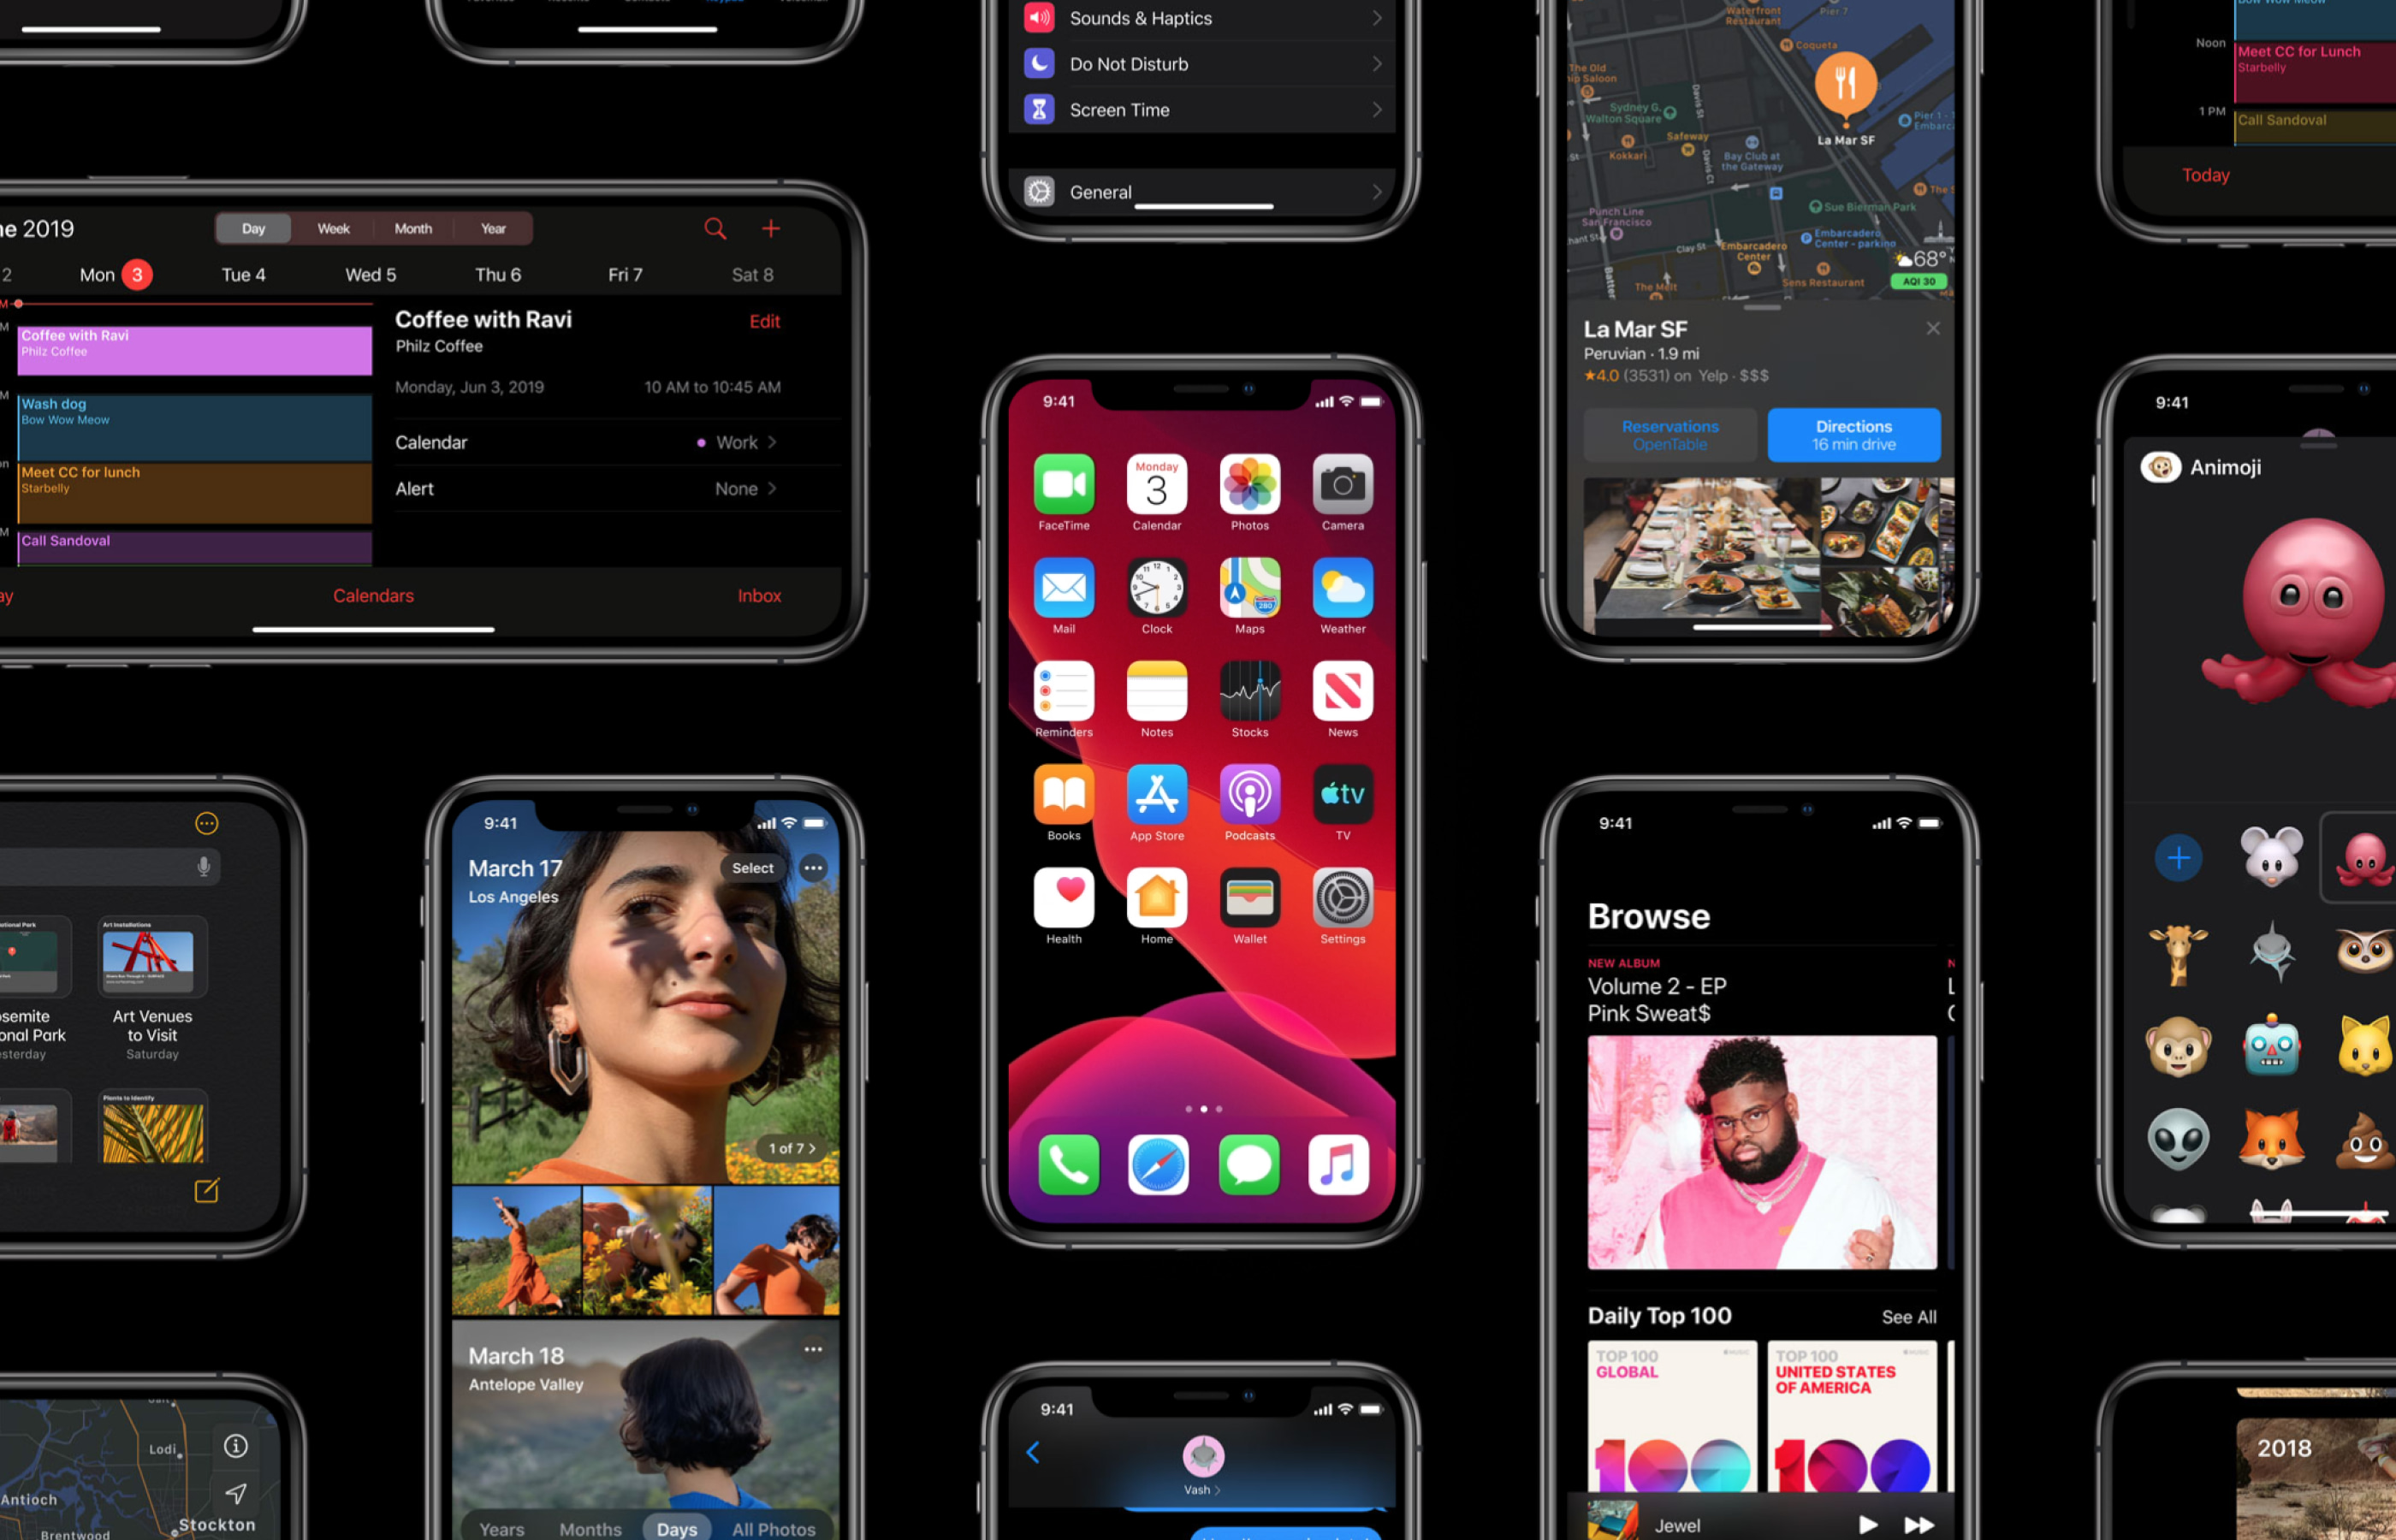 Calculator design idea #135: Apple introducing an entirely new OS for iPhone, iPad and its Watch - #WWDC19